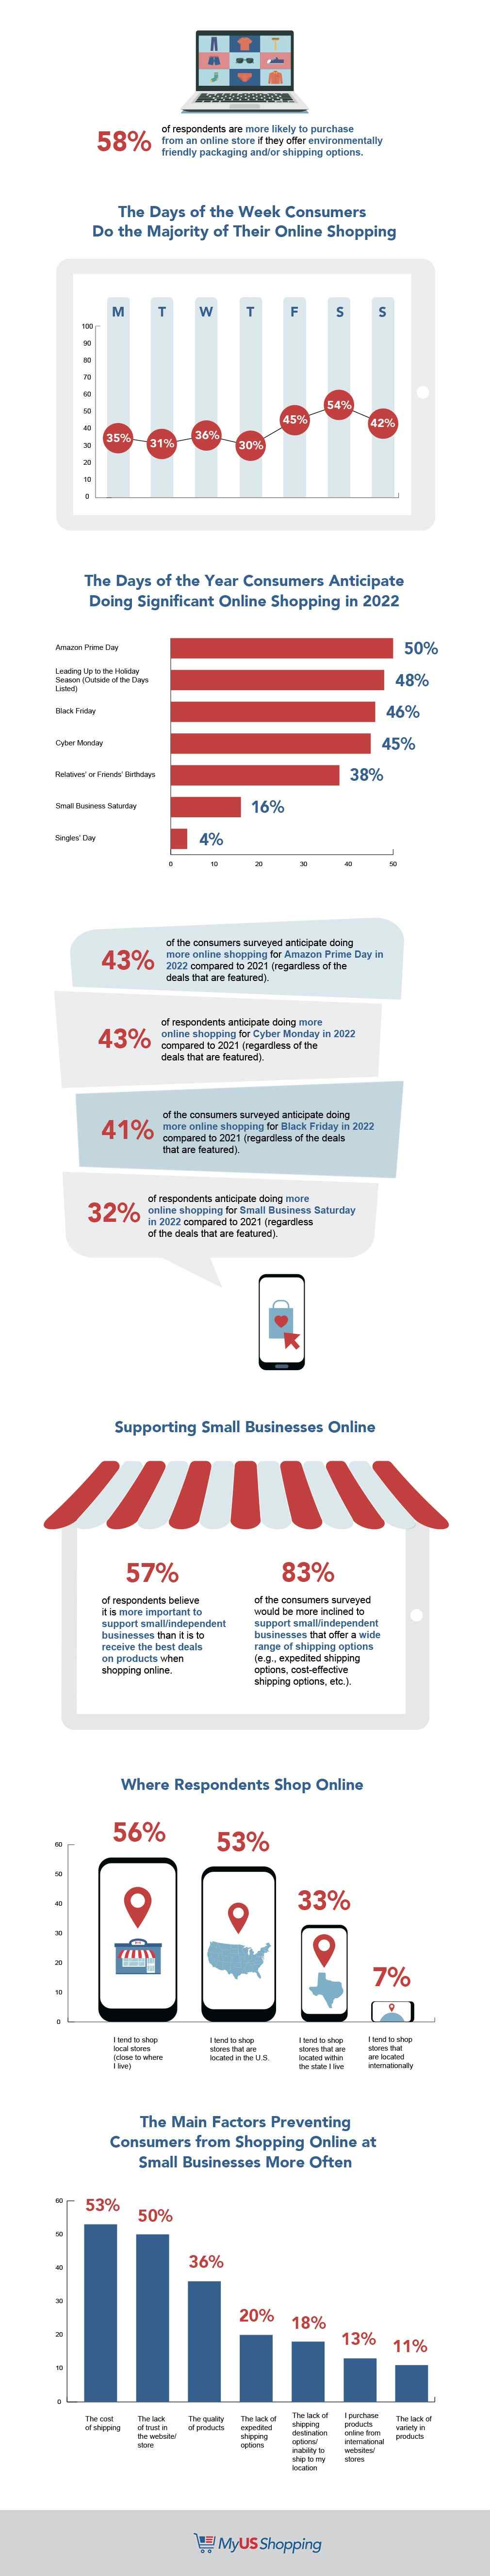 2022 Online Shopping Infographic Part 2